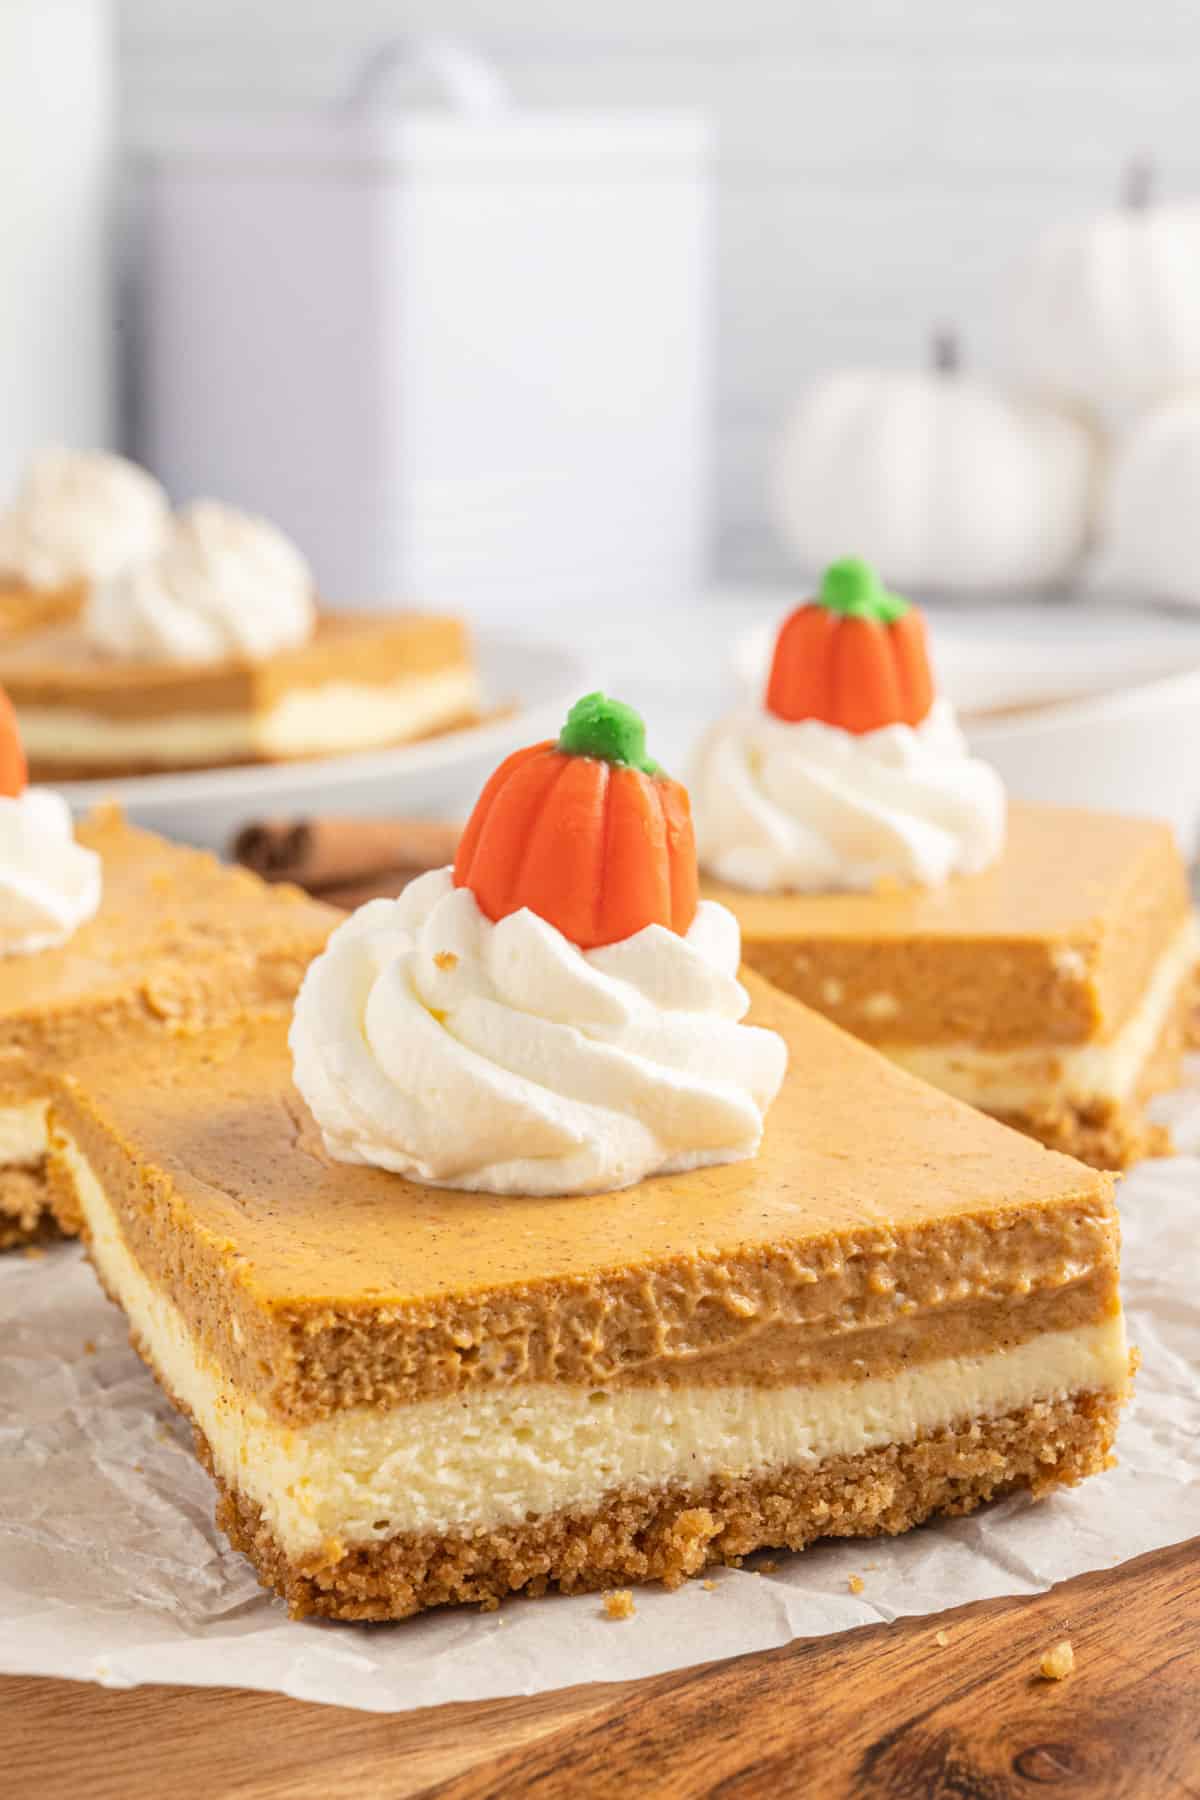 Pumpkin cheesecake bar garnished with whipped cream and candy corn pumpkins.